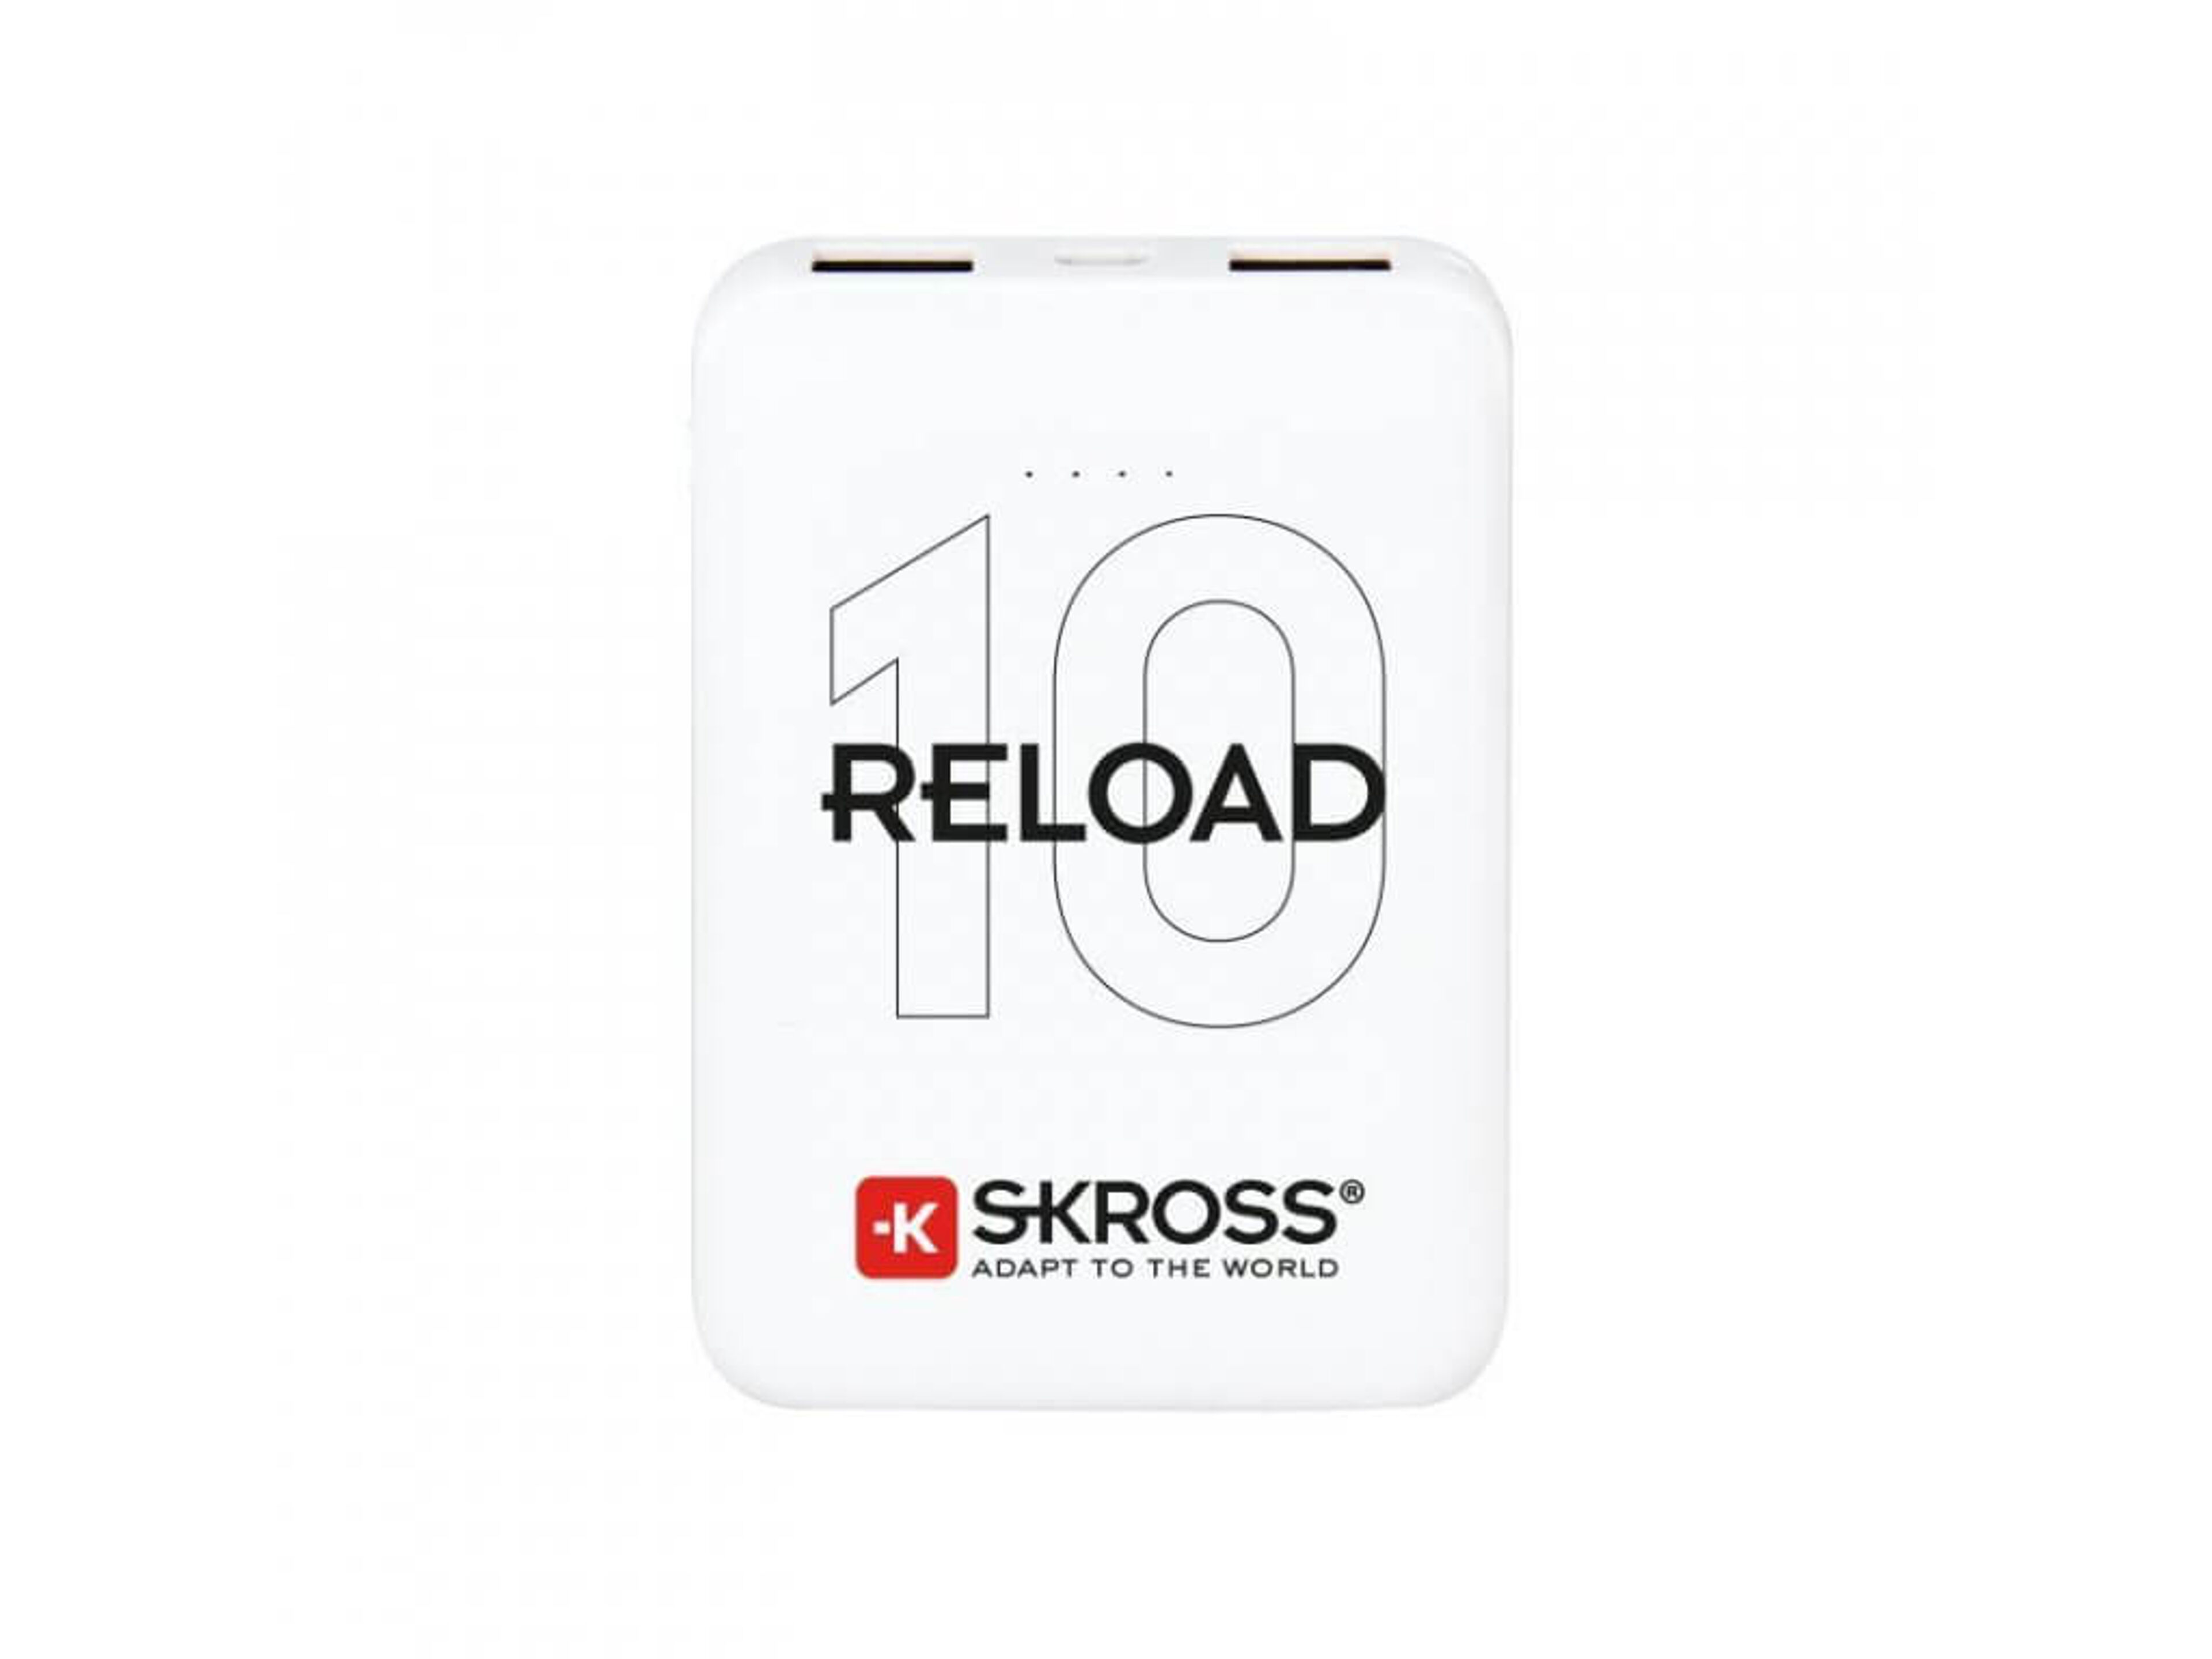 SKROSS powerbank, Reload 10, 10000mAh, 2x 2A output, microUSB cable